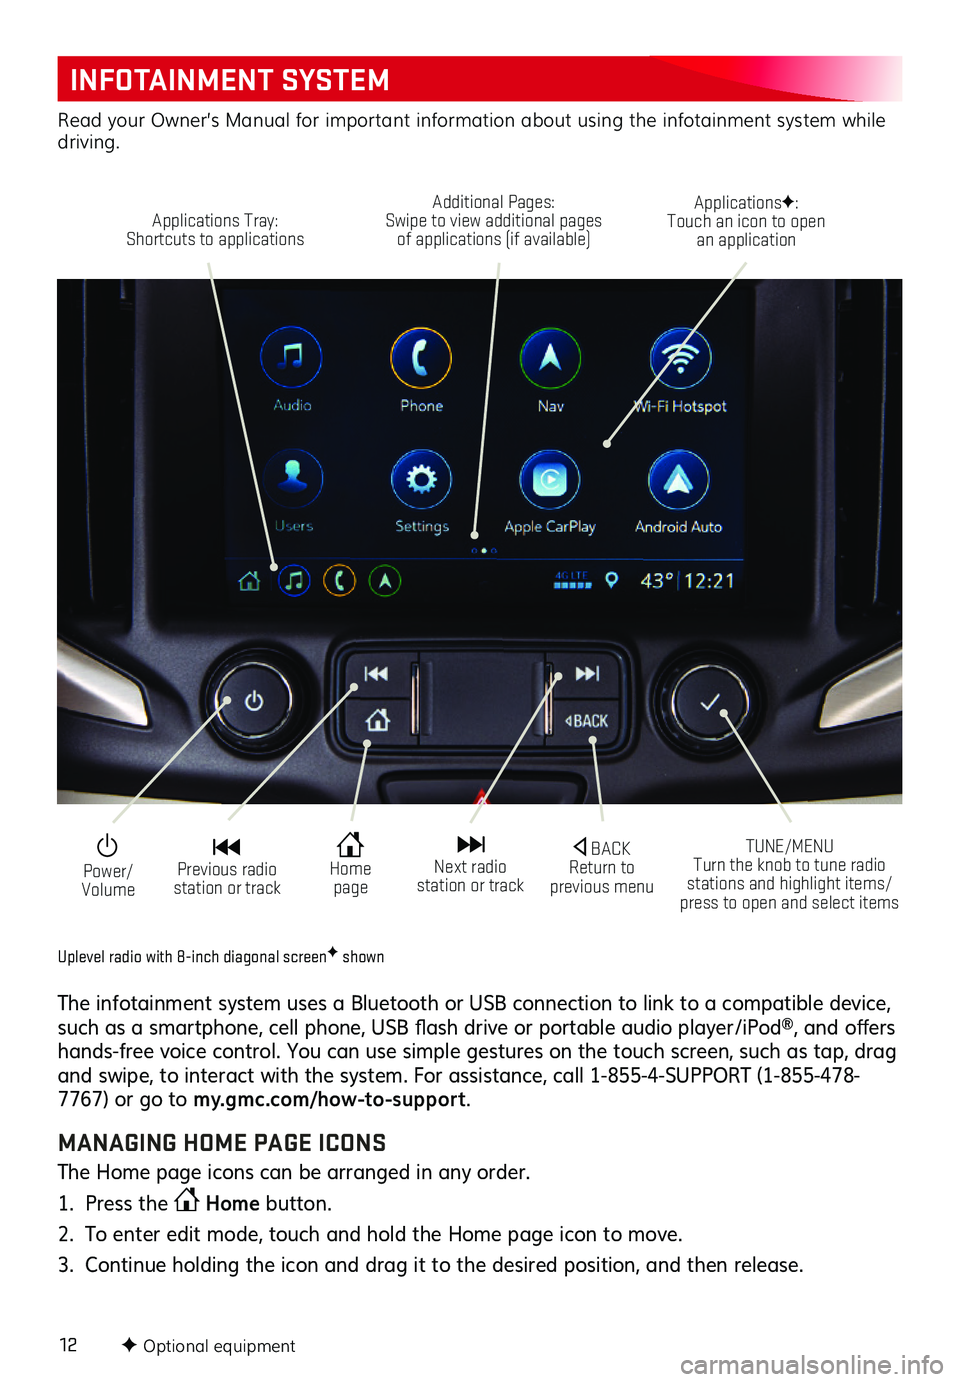 GMC TERRAIN 2021  Get To Know Guide 12
INFOTAINMENT SYSTEM
F Optional equipment
Uplevel radio with 8-inch diagonal screenF shown
The infotainment system uses a Bluetooth or USB connection to link to a compatible device, such as a smartp